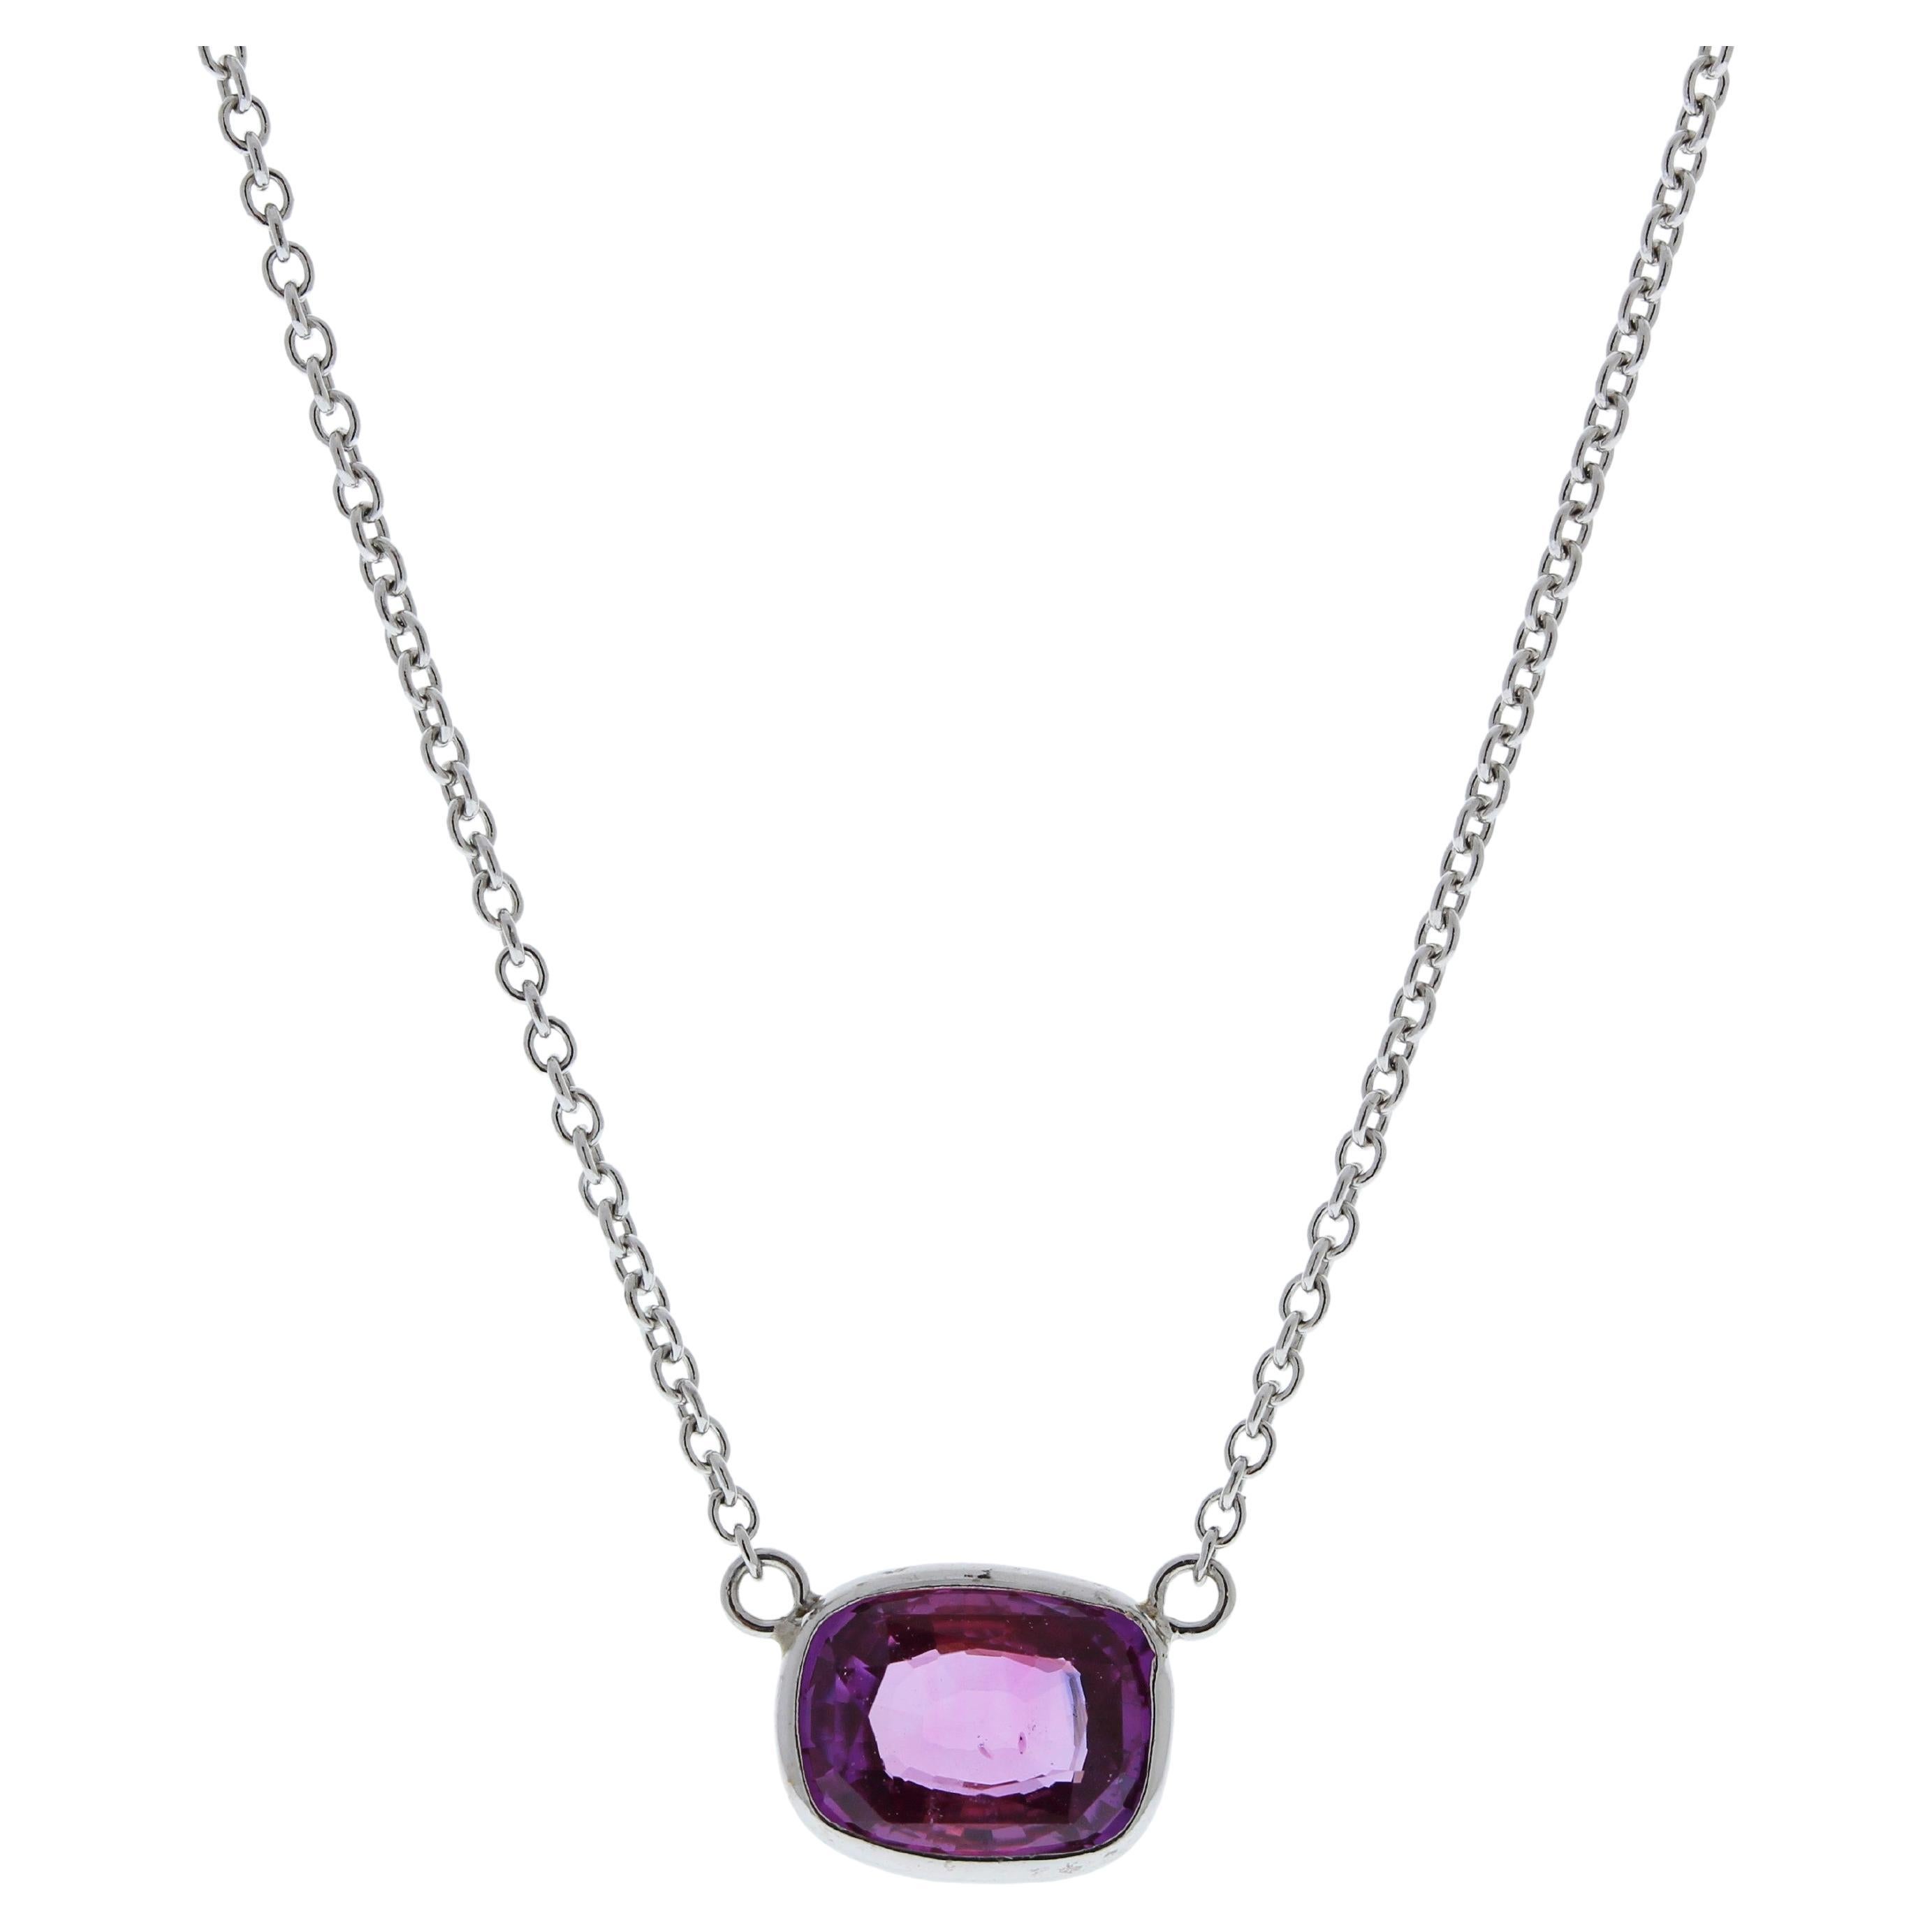 2.08 Carat Cushion Sapphire Purplish Pink Fashion Necklaces In 14k White Gold For Sale